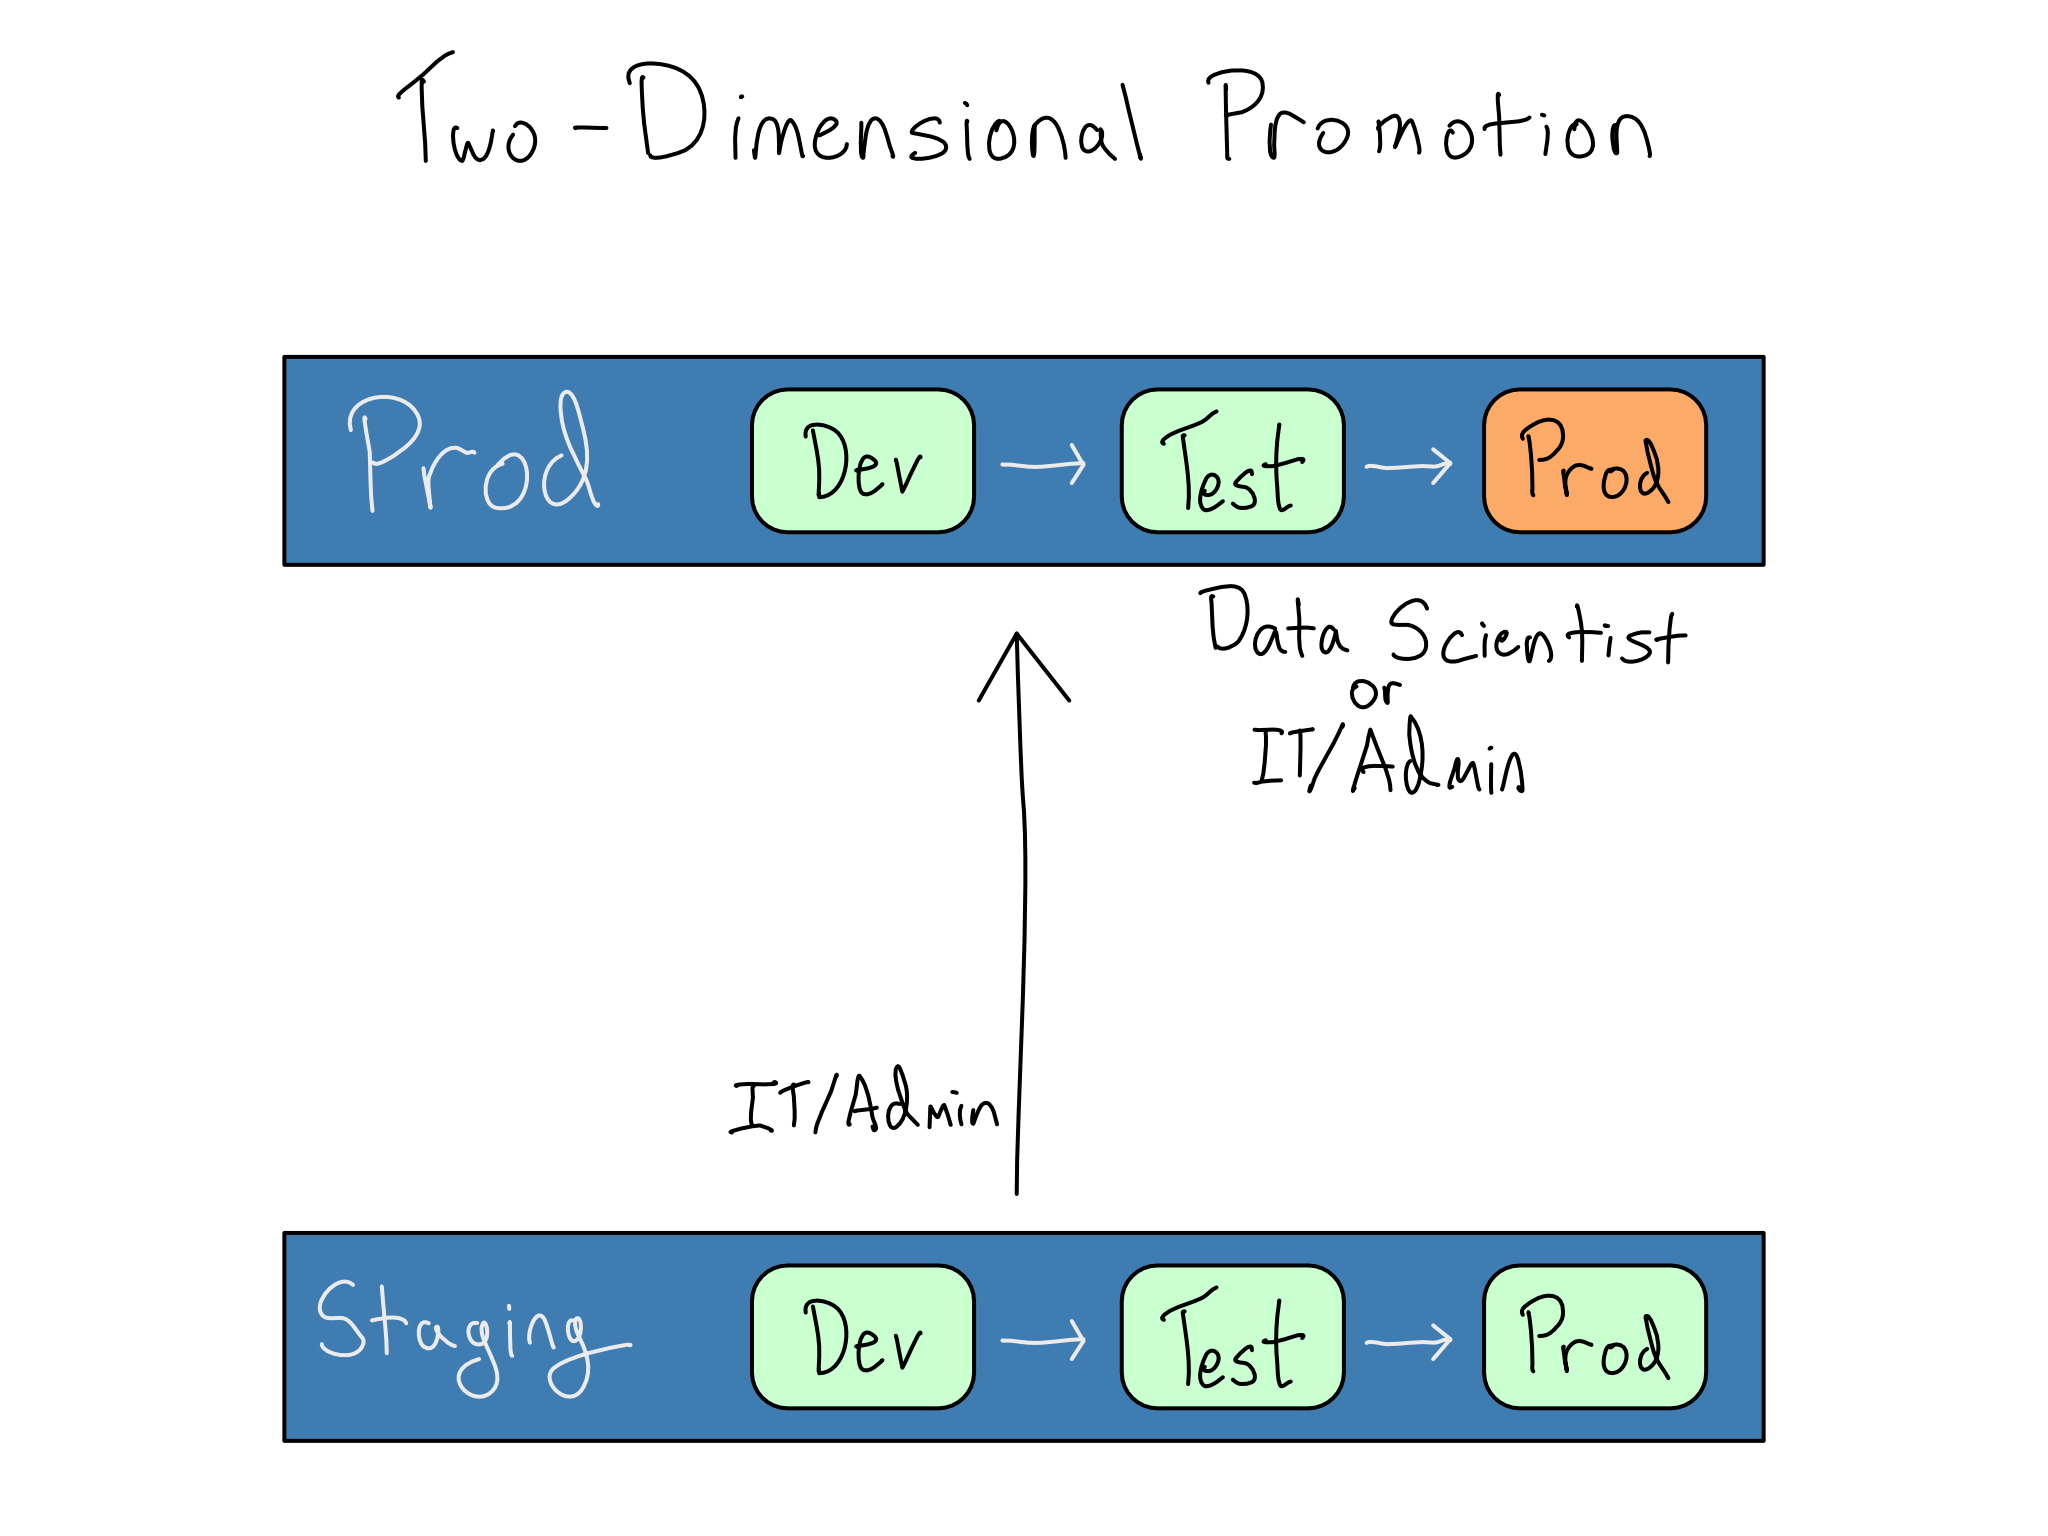 The IT/Admin promotes the complete staging environment, then the data scientist or IT/Admin promote within Prod.